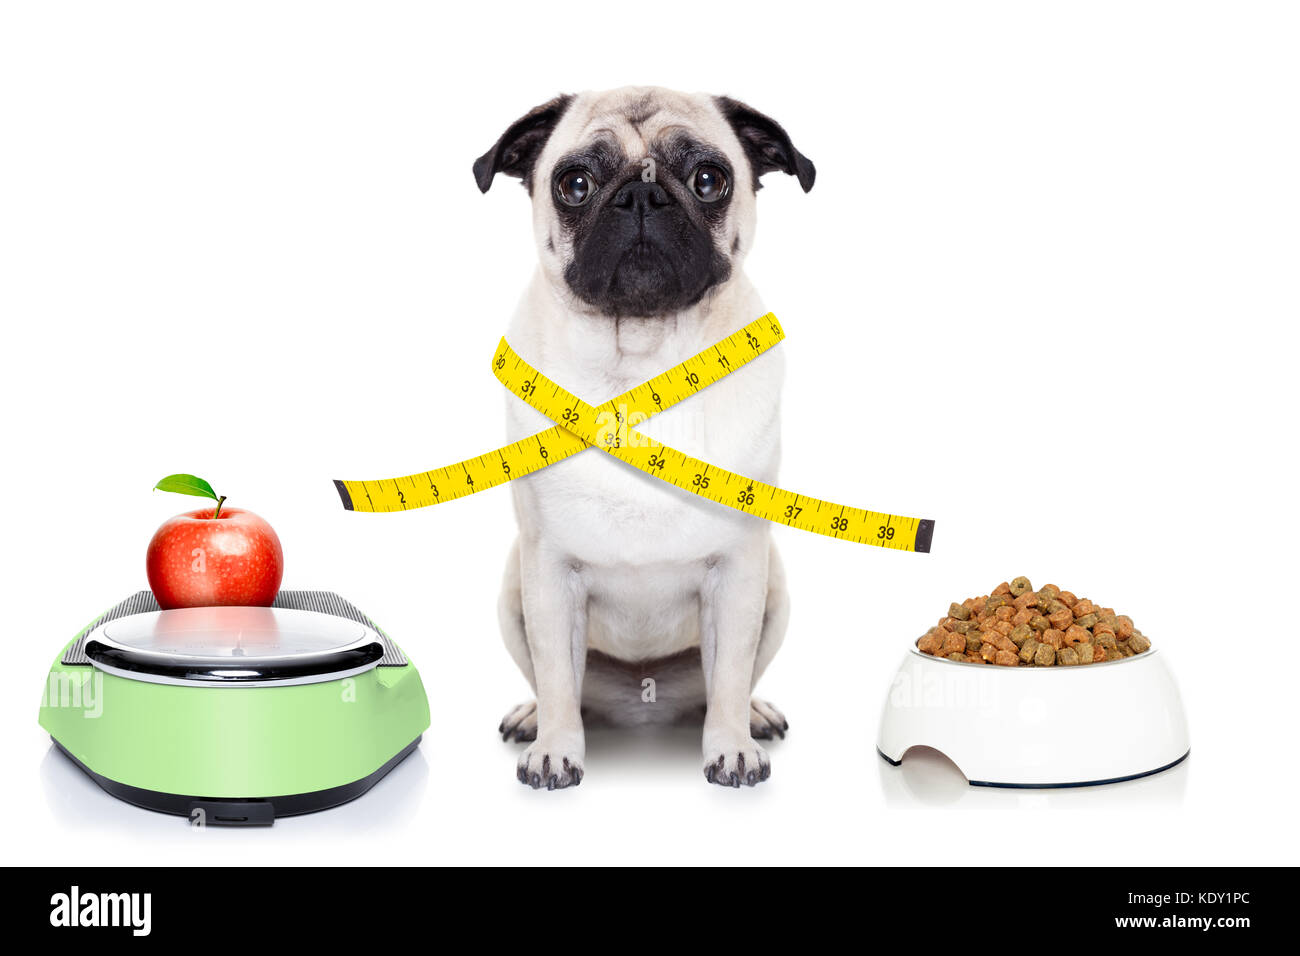 https://c8.alamy.com/comp/KDY1PC/healthy-pug-dog-beside-a-scale-bowl-and-measuring-tape-around-waist-KDY1PC.jpg